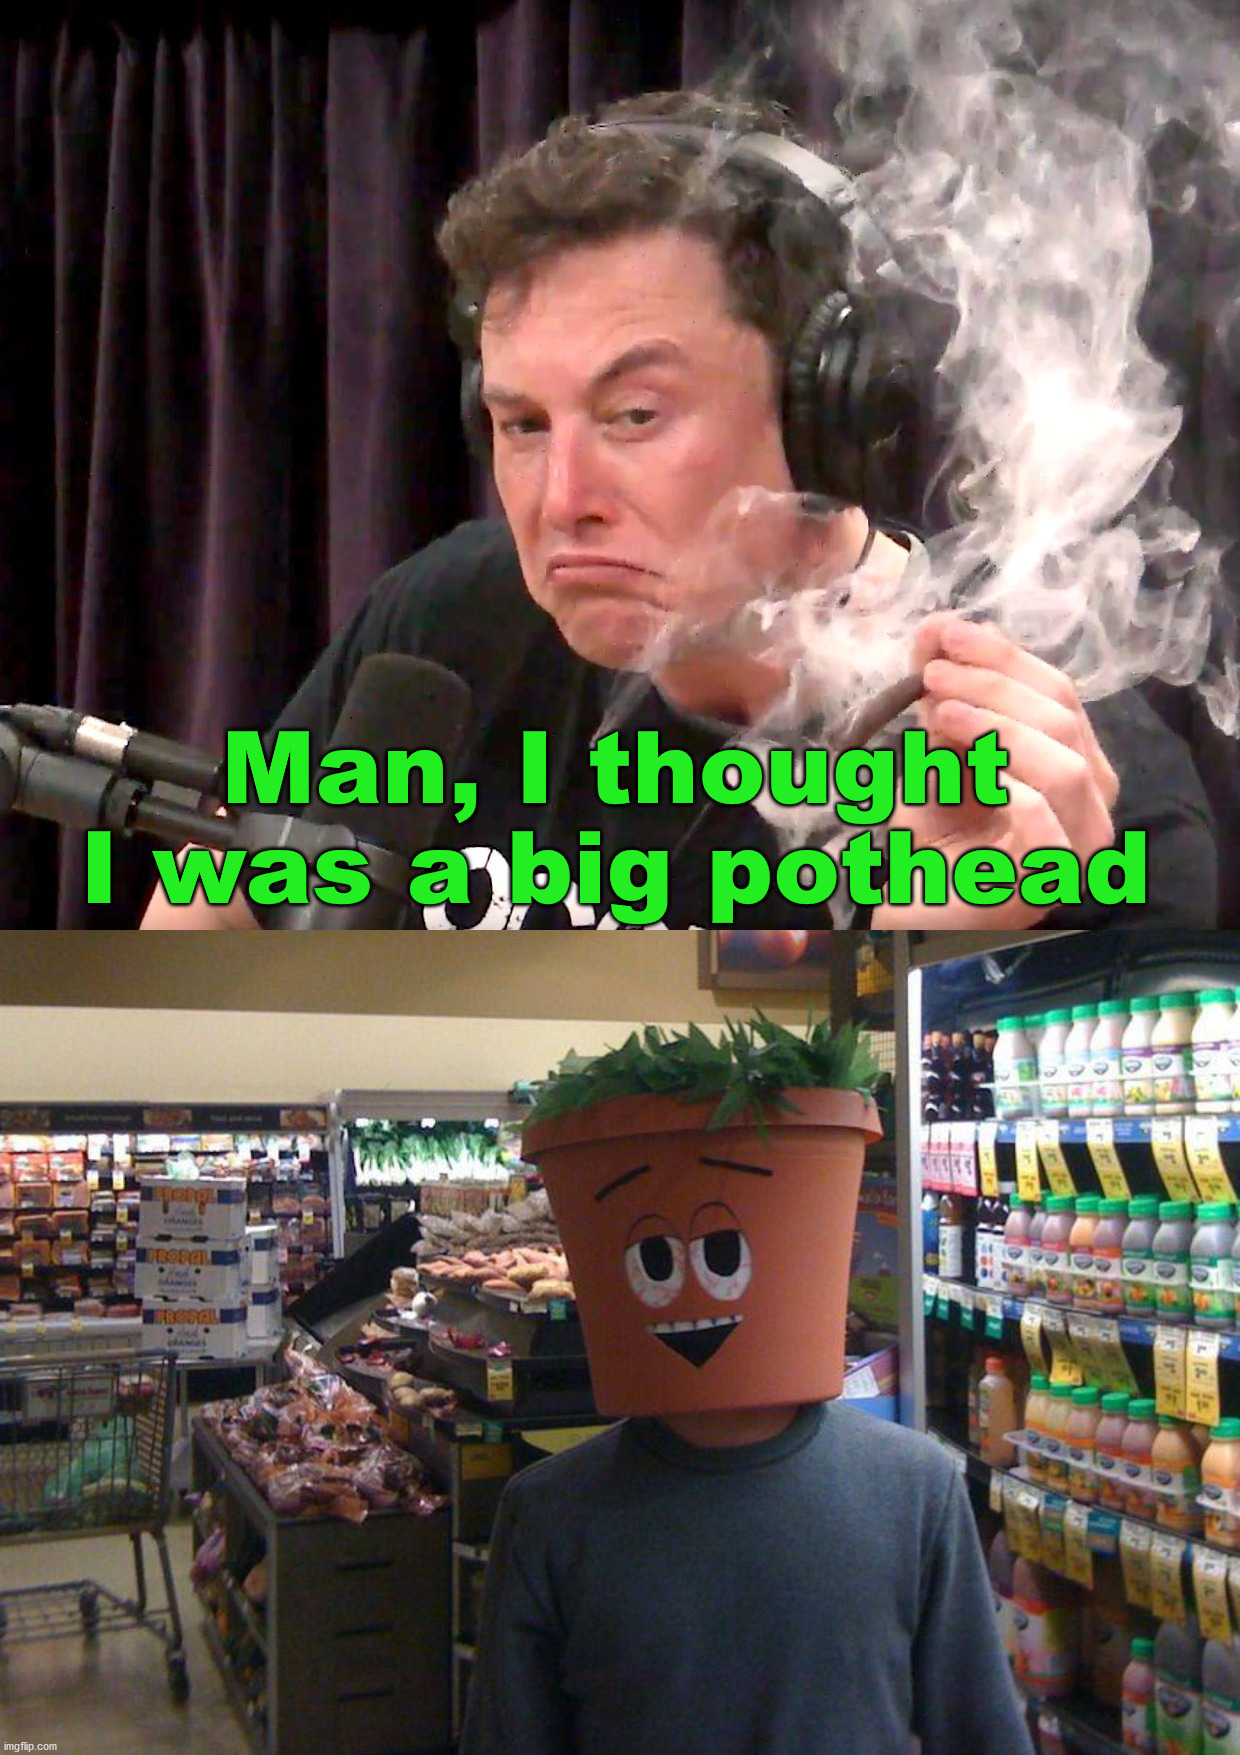 A real pothead. | Man, I thought I was a big pothead | image tagged in elon musk high af,pothead | made w/ Imgflip meme maker